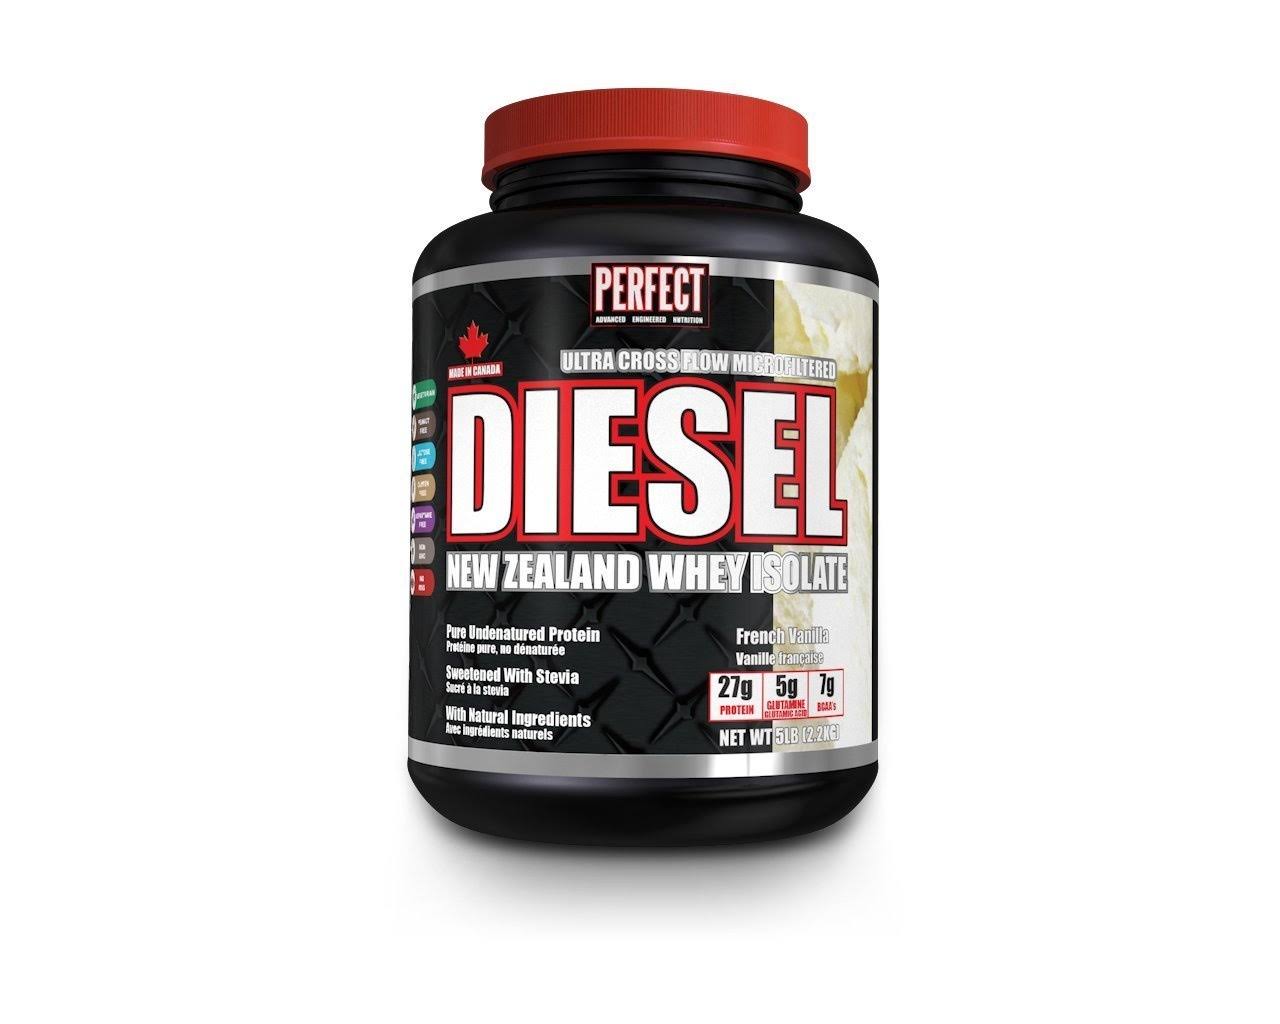 Perfect Diesel Whey Protein Isolate Supplement - French Vanilla, 5lb